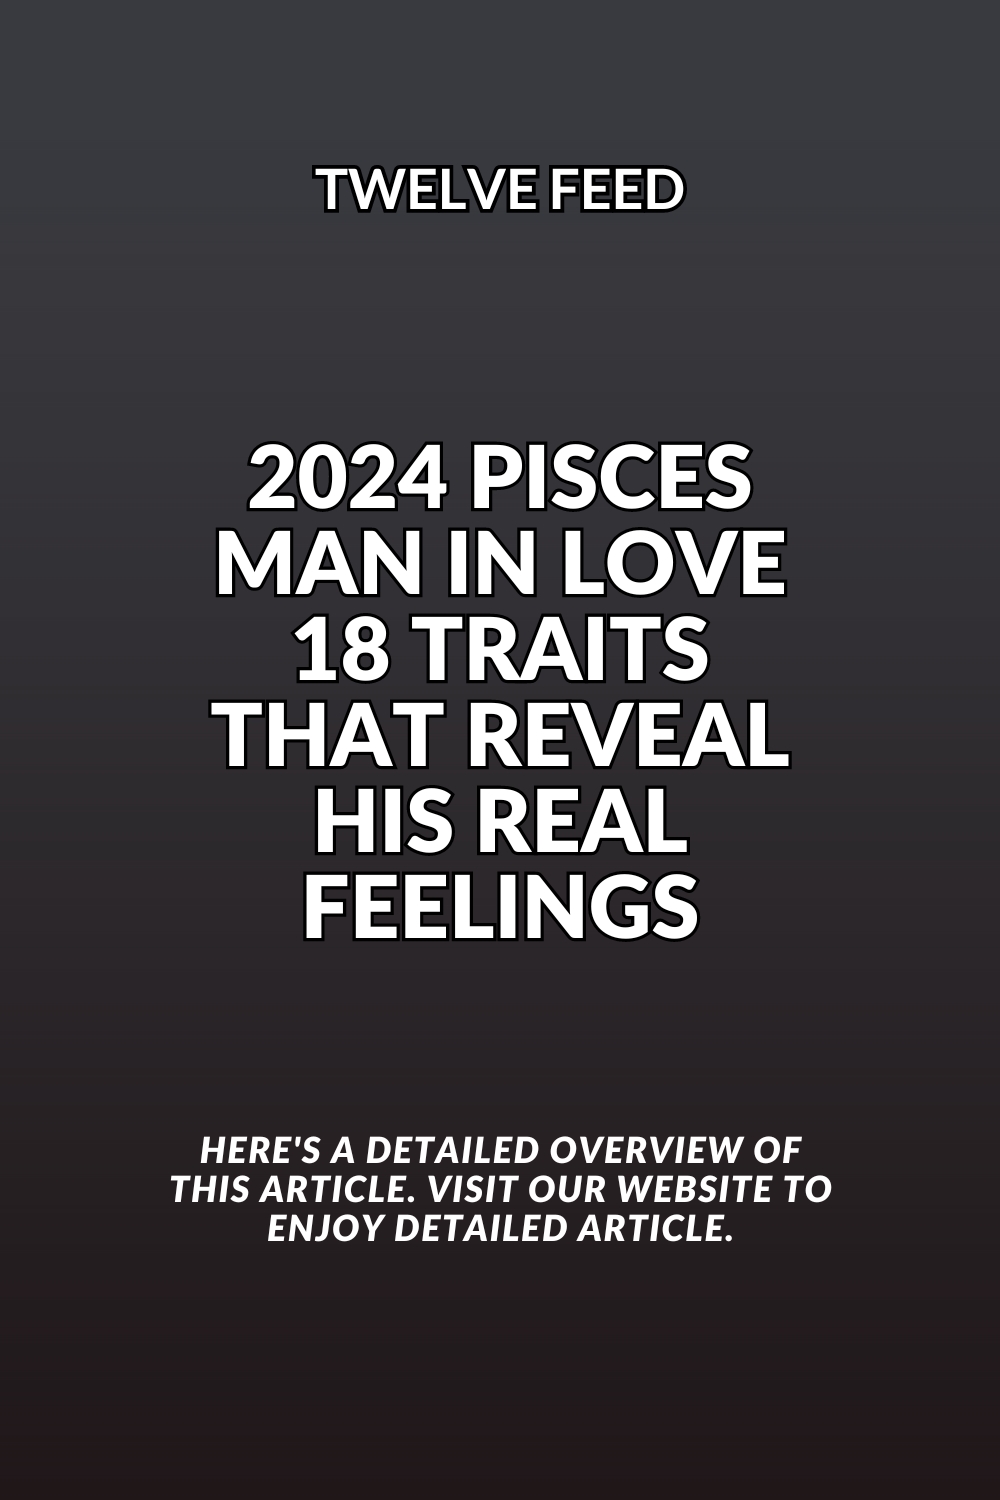 2024 Pisces Man In Love: 18 Traits That Reveal His Real Feelings